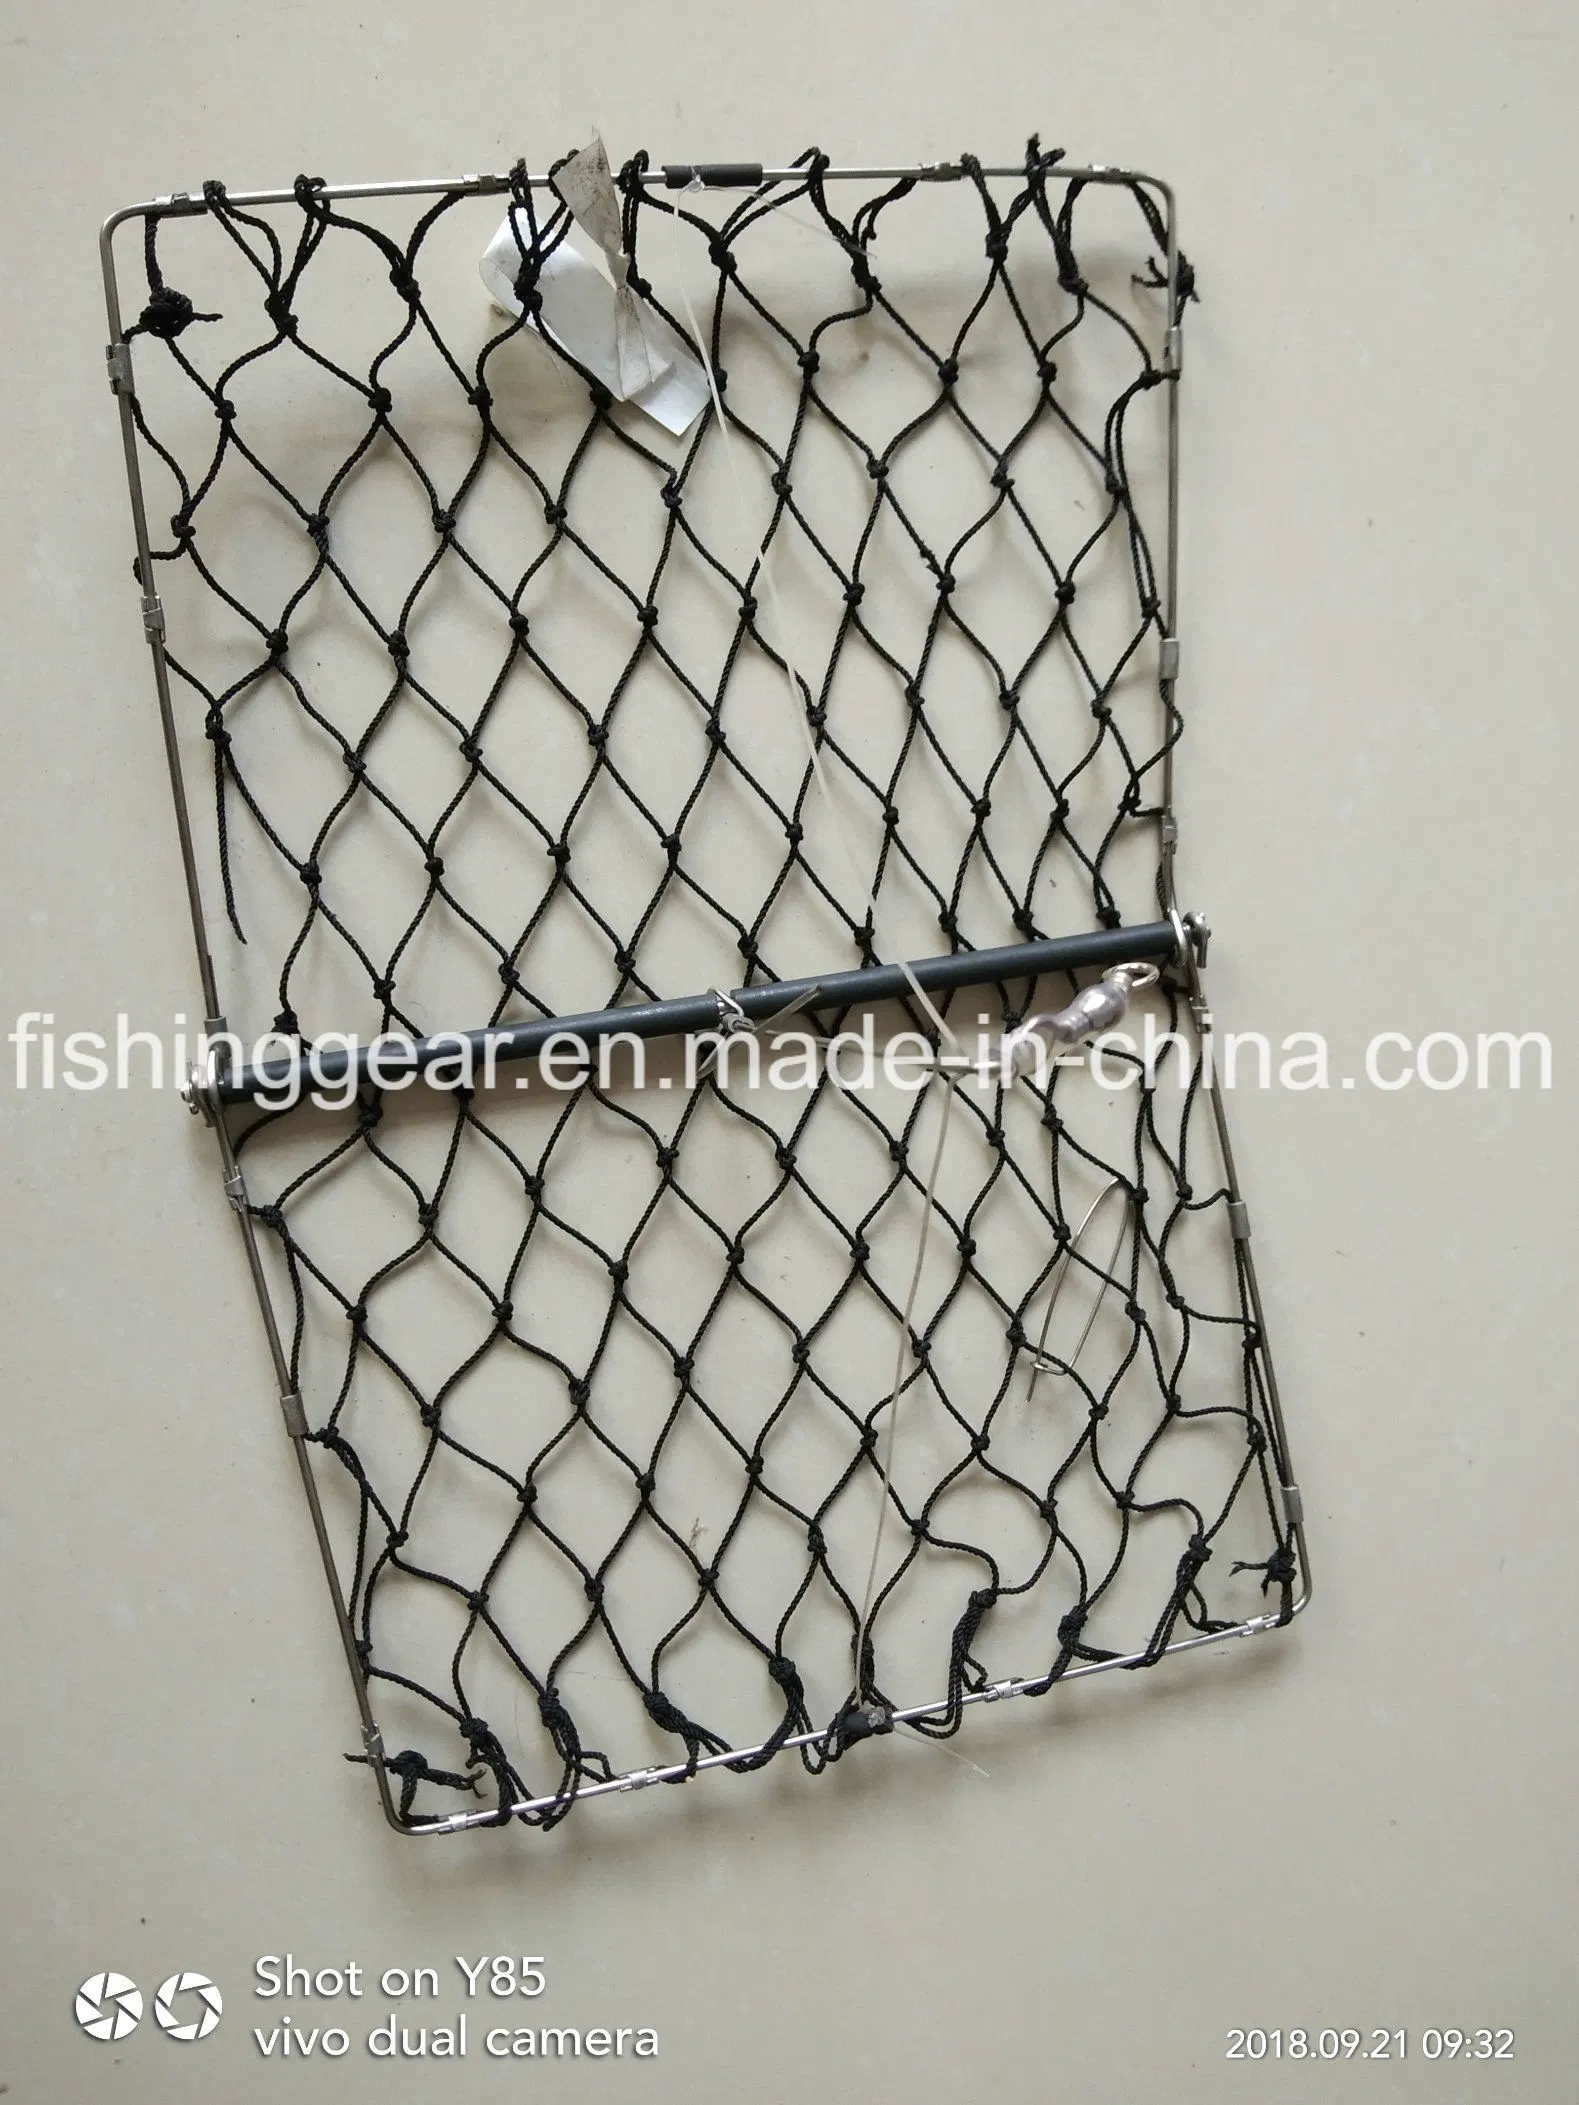 Square Type S/S Crab Traps for Fishing Gear